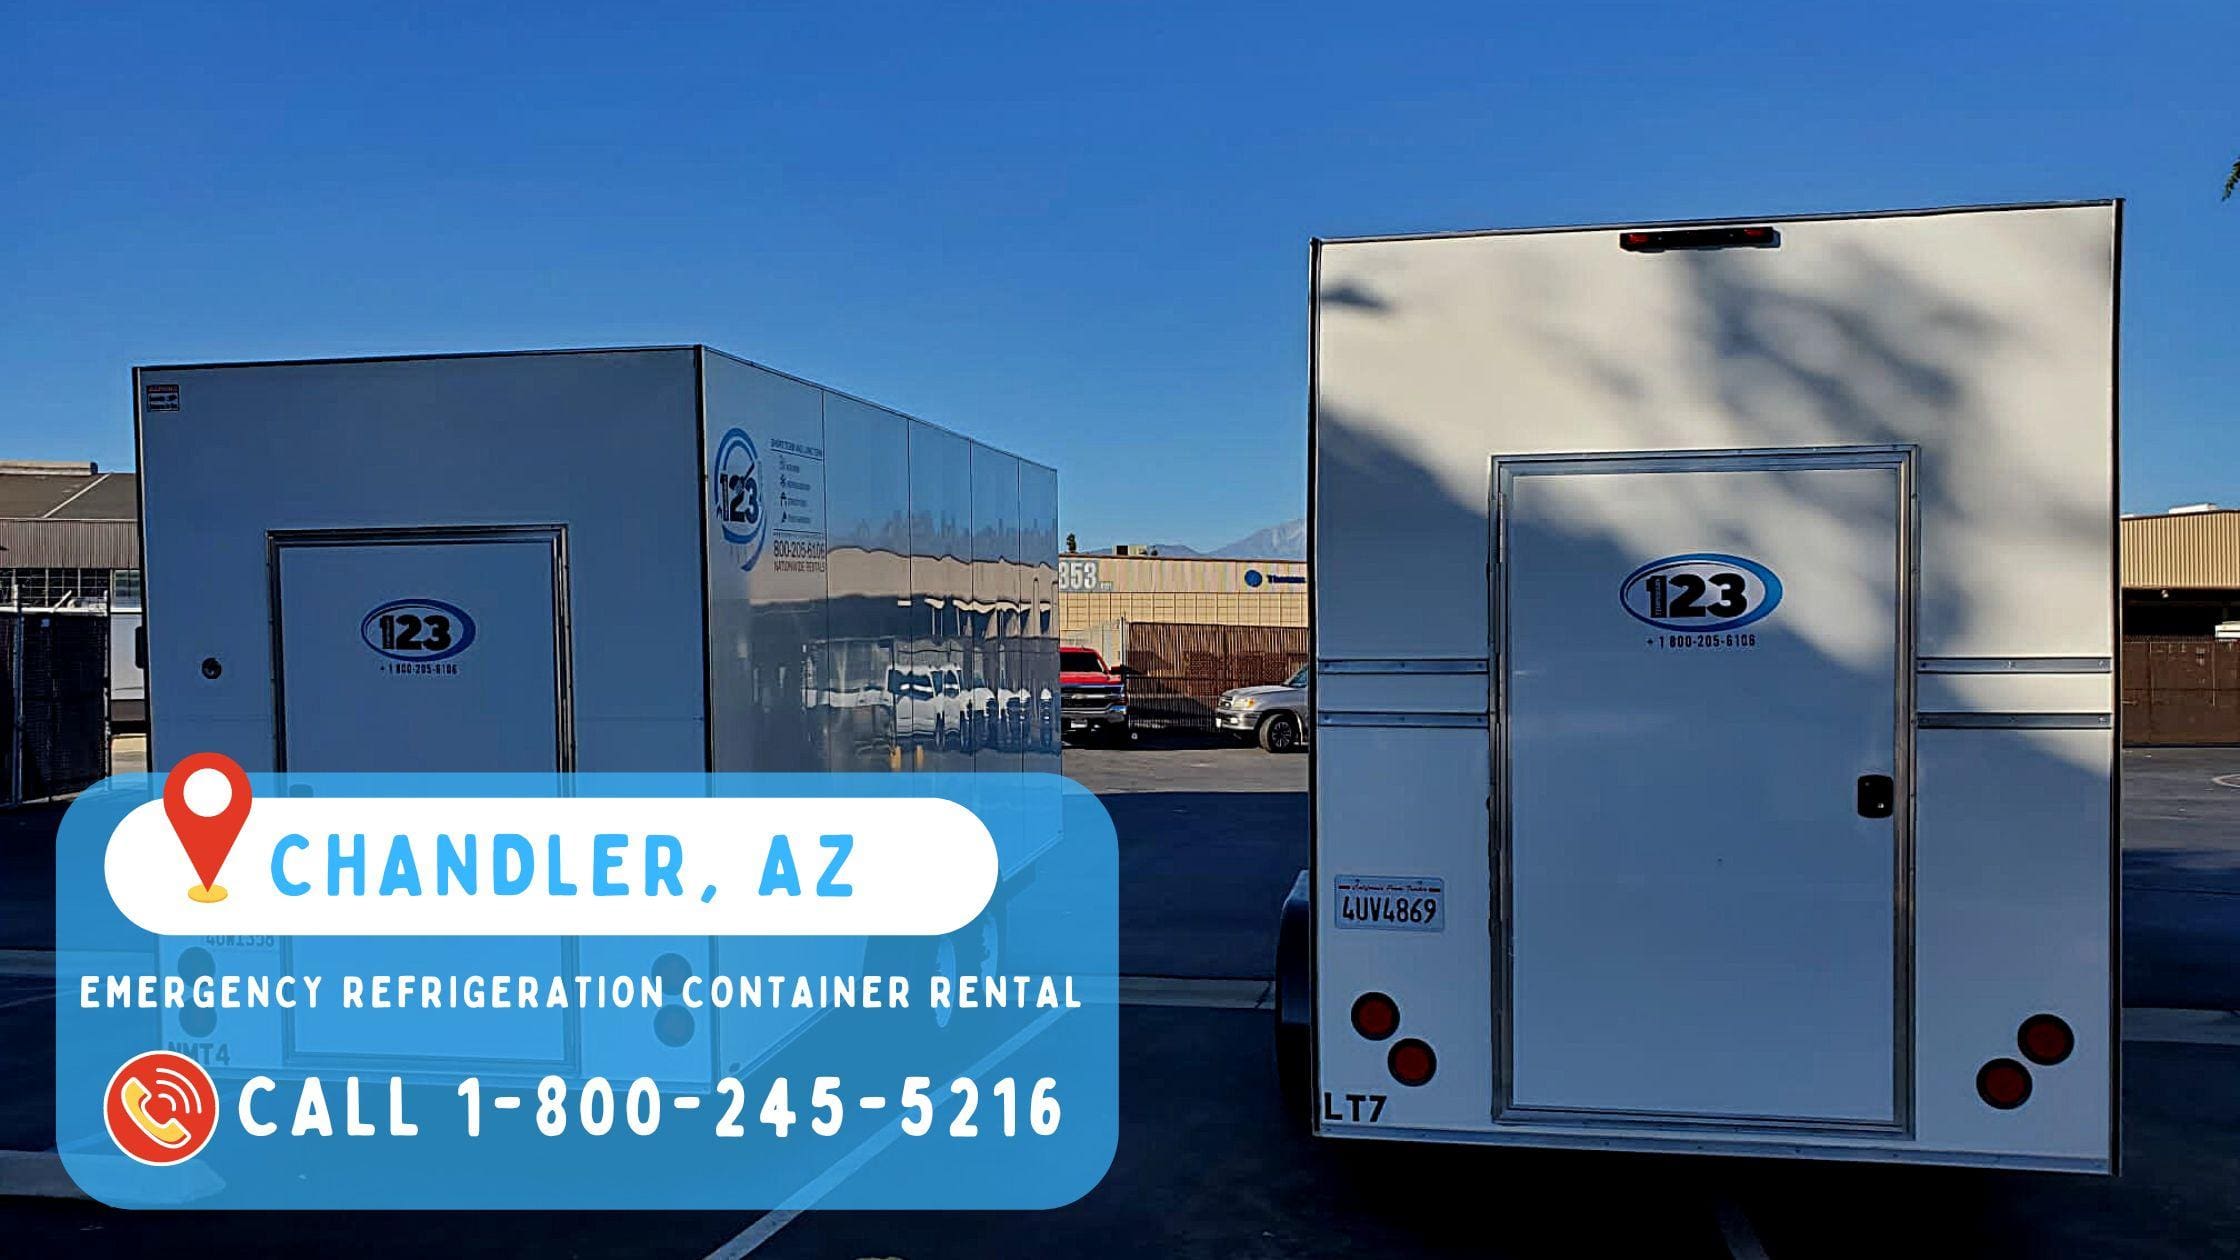 Emergency Refrigeration Container Rental in Chandler